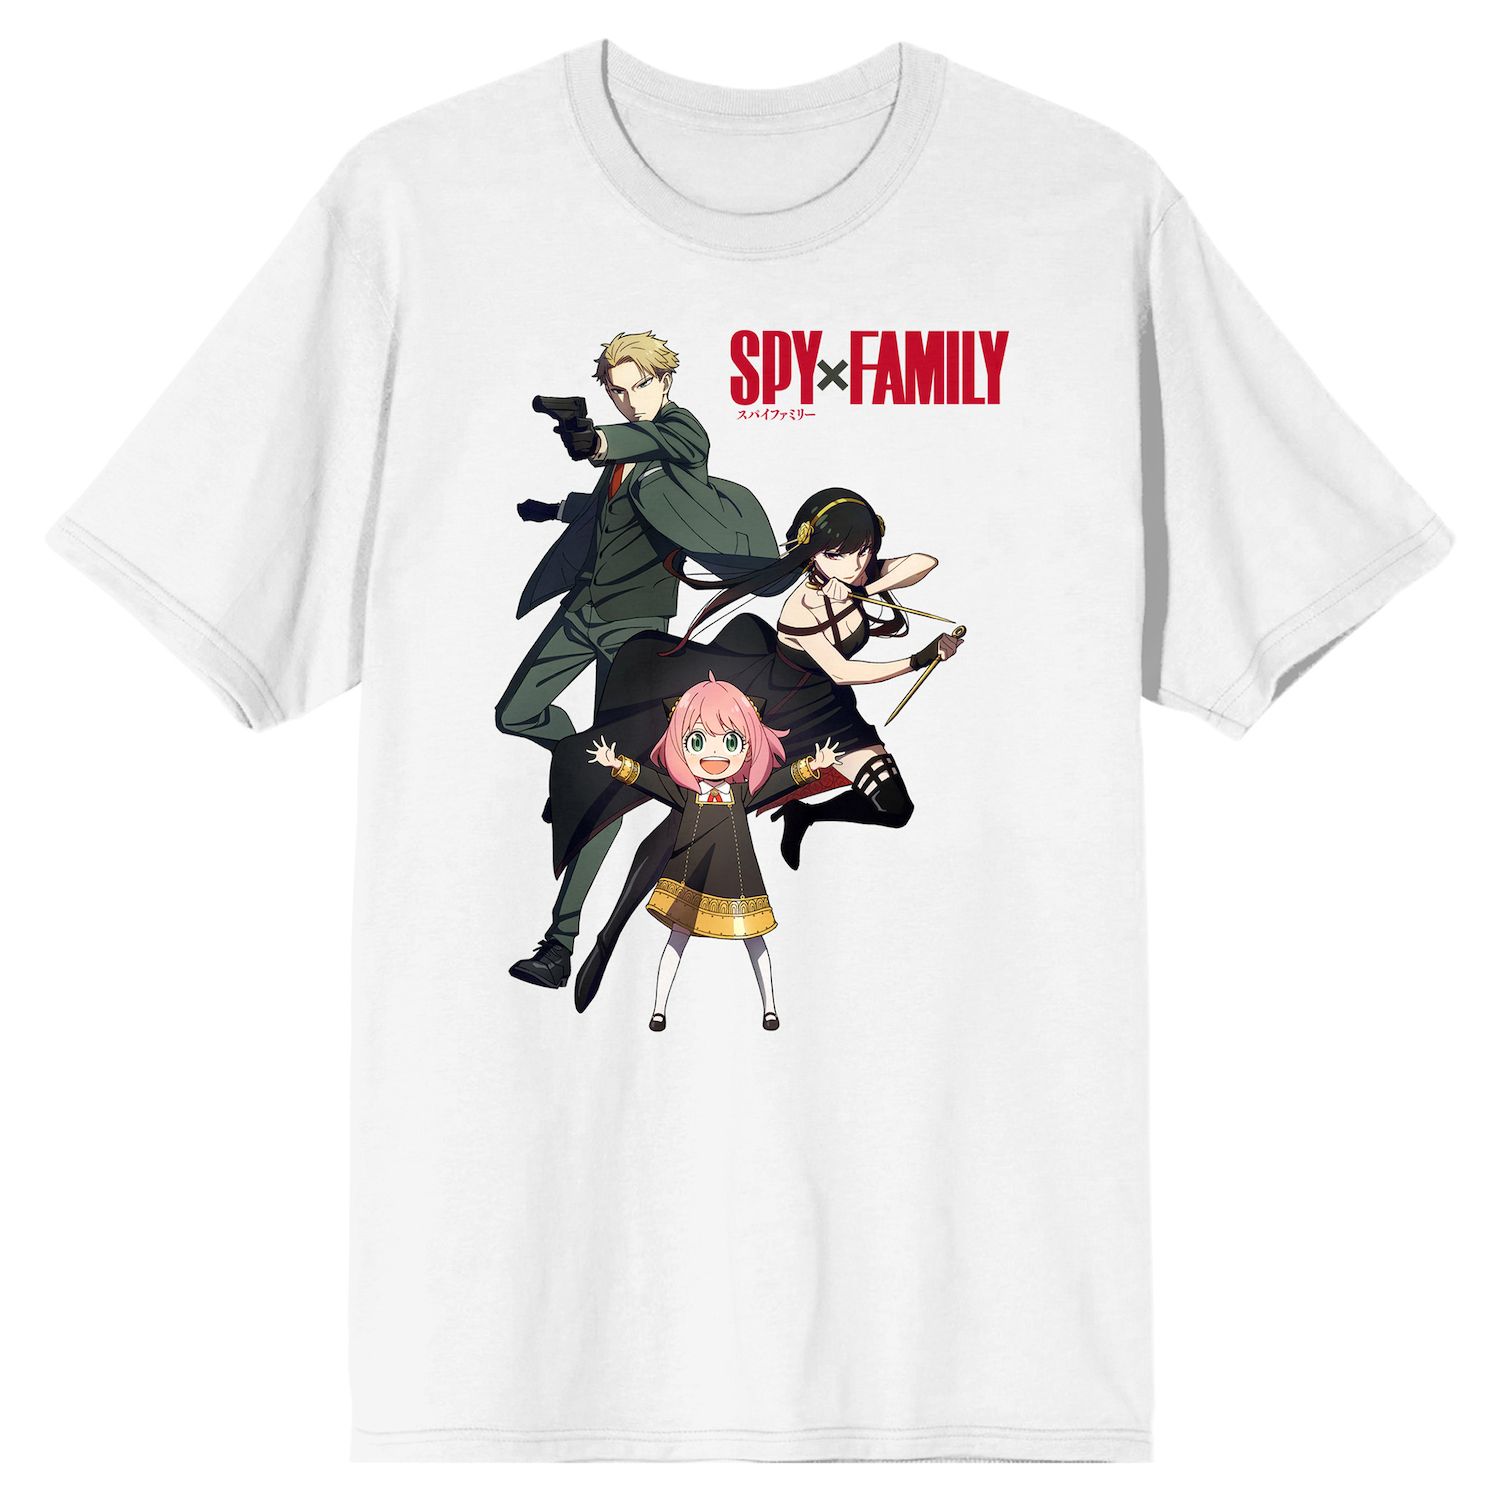 This is an offer made on the Request: SPY X FAMILY Merch